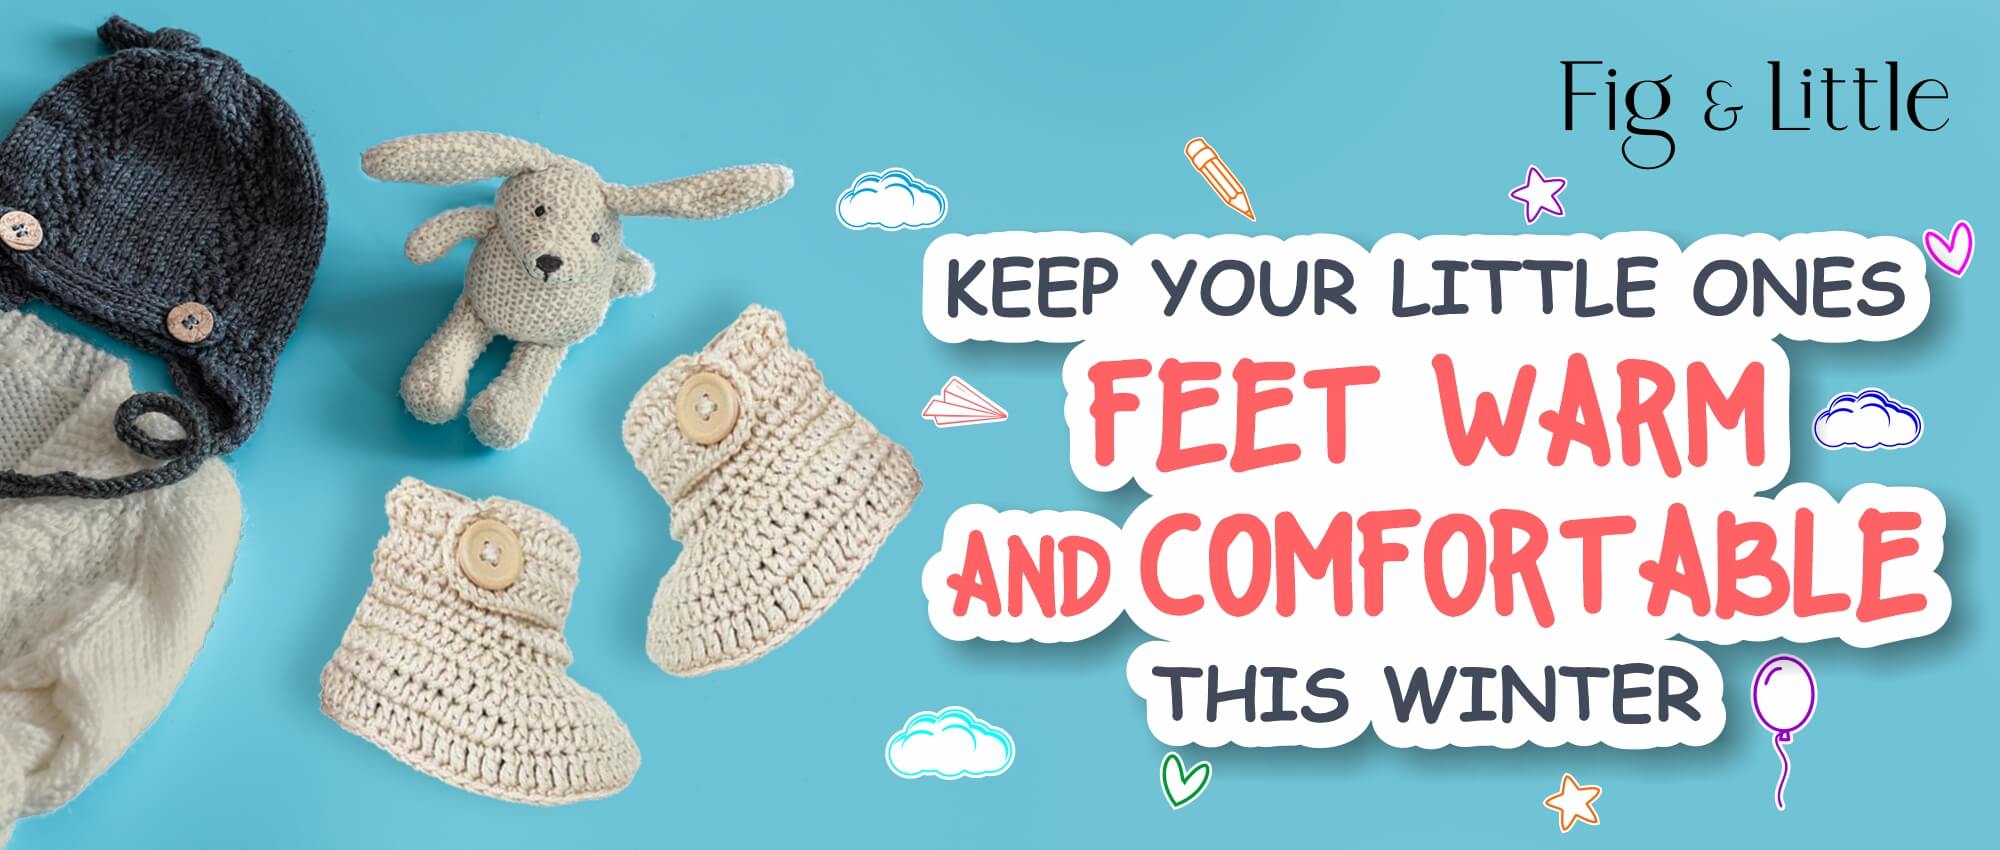 KEEP YOUR LITTLE ONES FEET WARM AND COMFORTABLE THIS WINTER